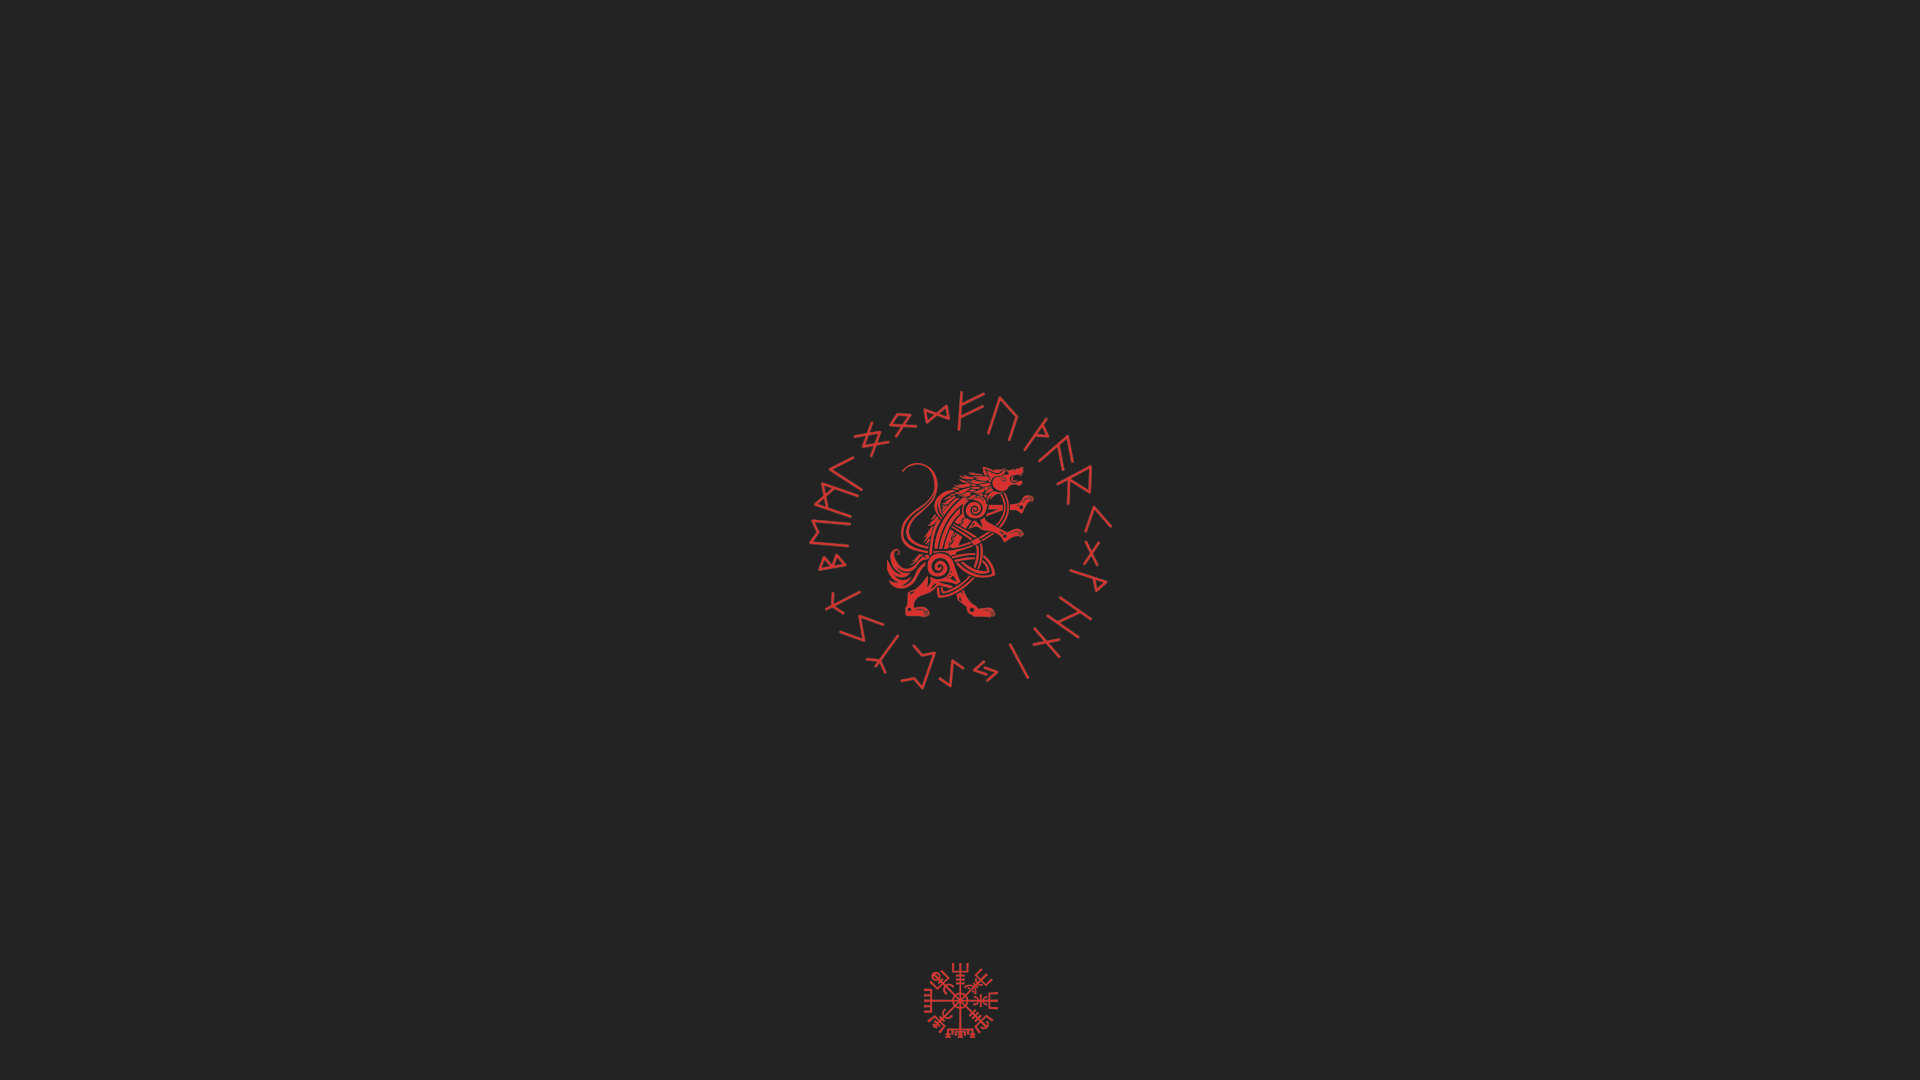 General 1920x1080 wolf vikings runes minimalism Fenrir the raven from the north